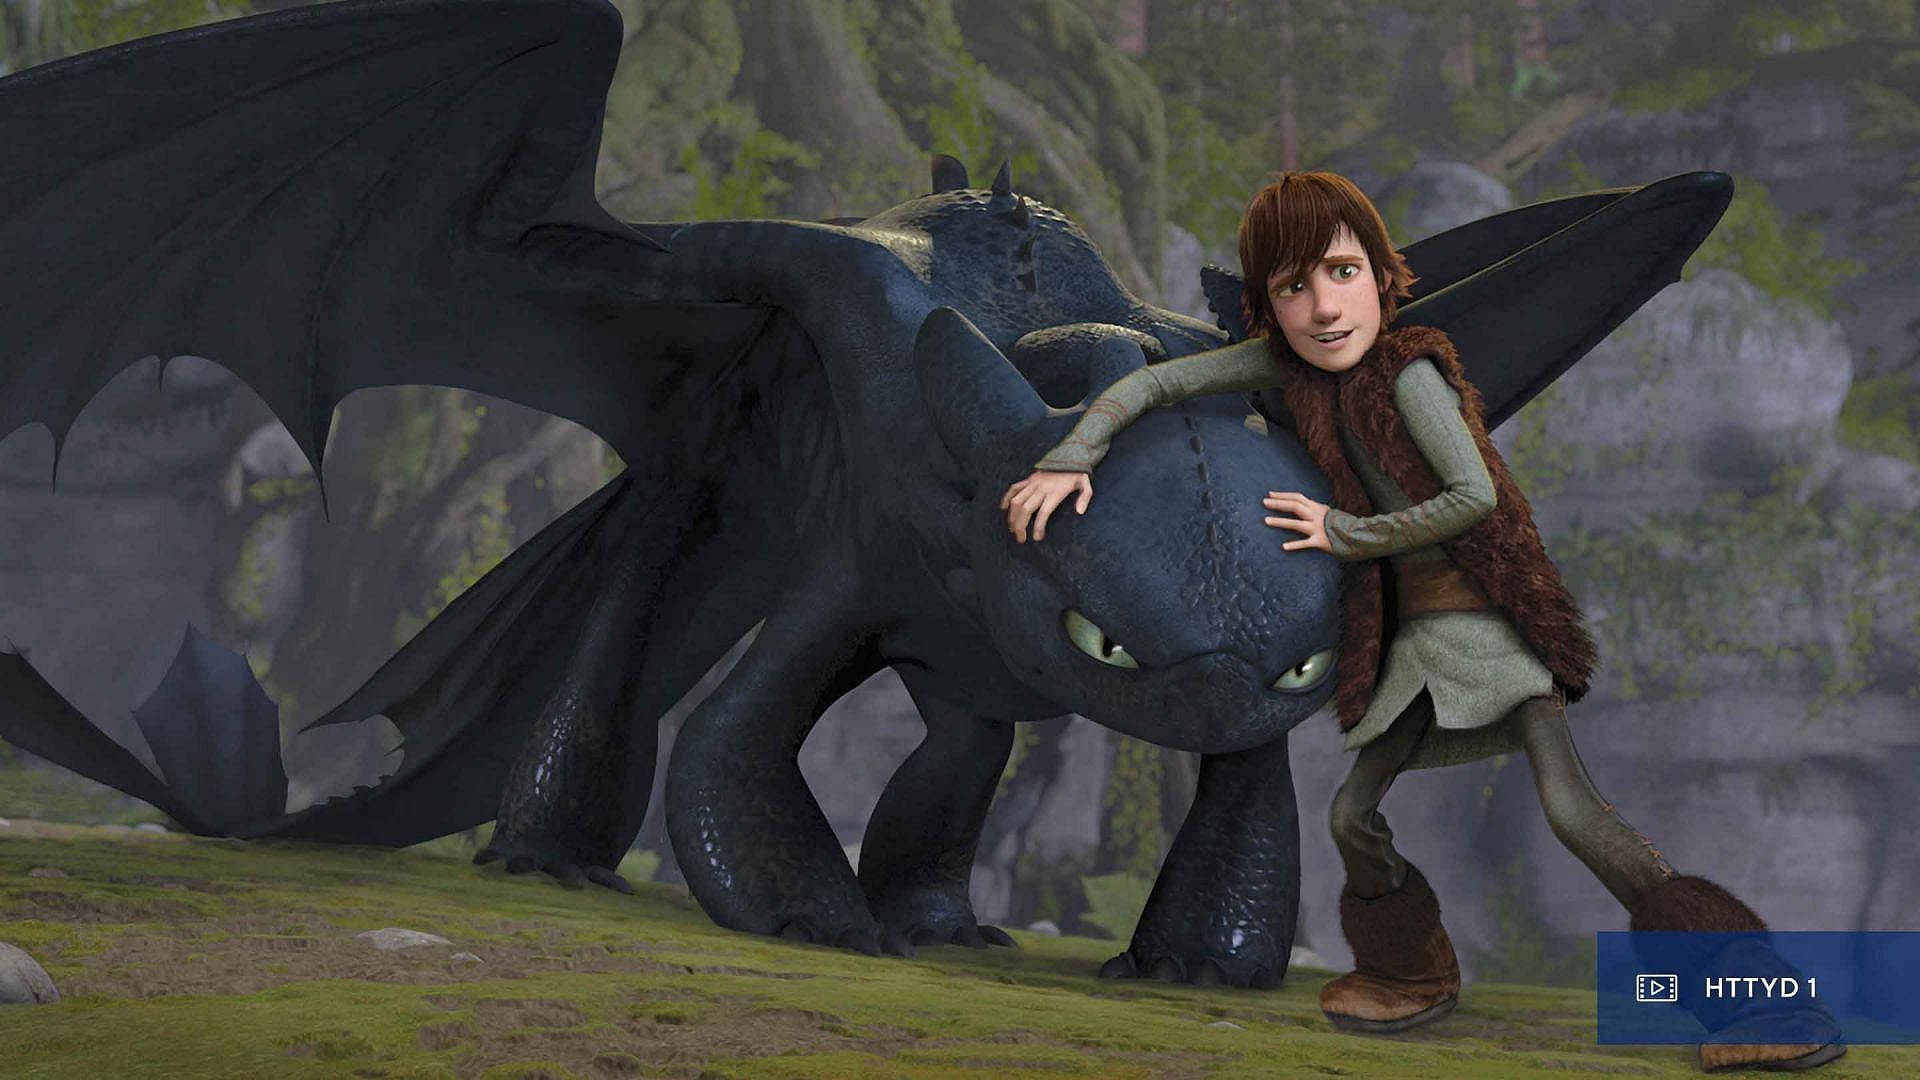 deepti jaggi recommends How To Train Your Dragon Photos